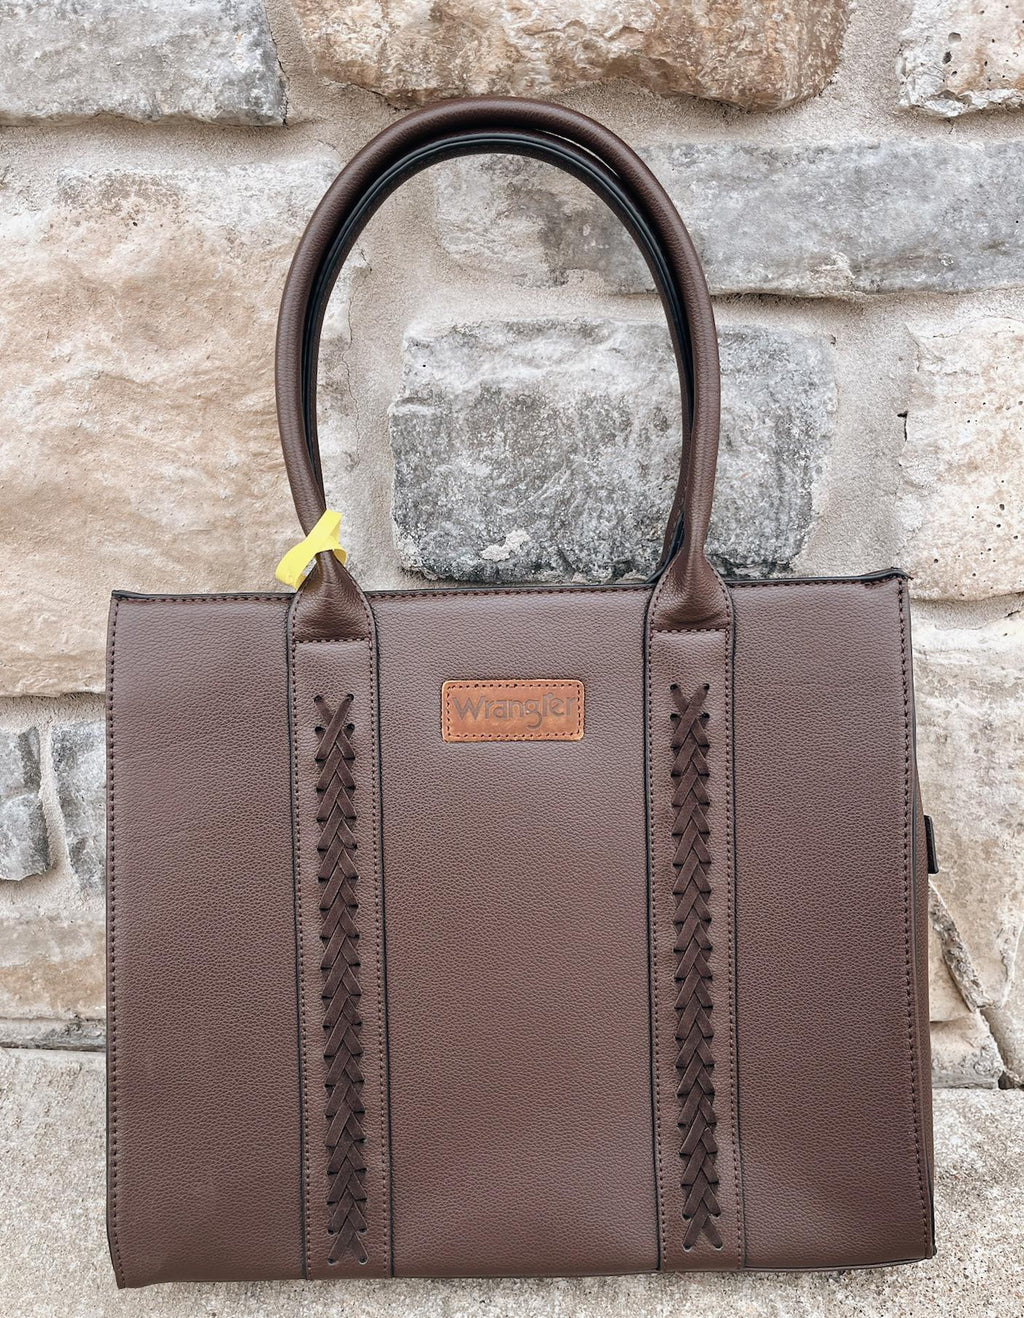 Wrangler Chocolate Faux Leather Tote